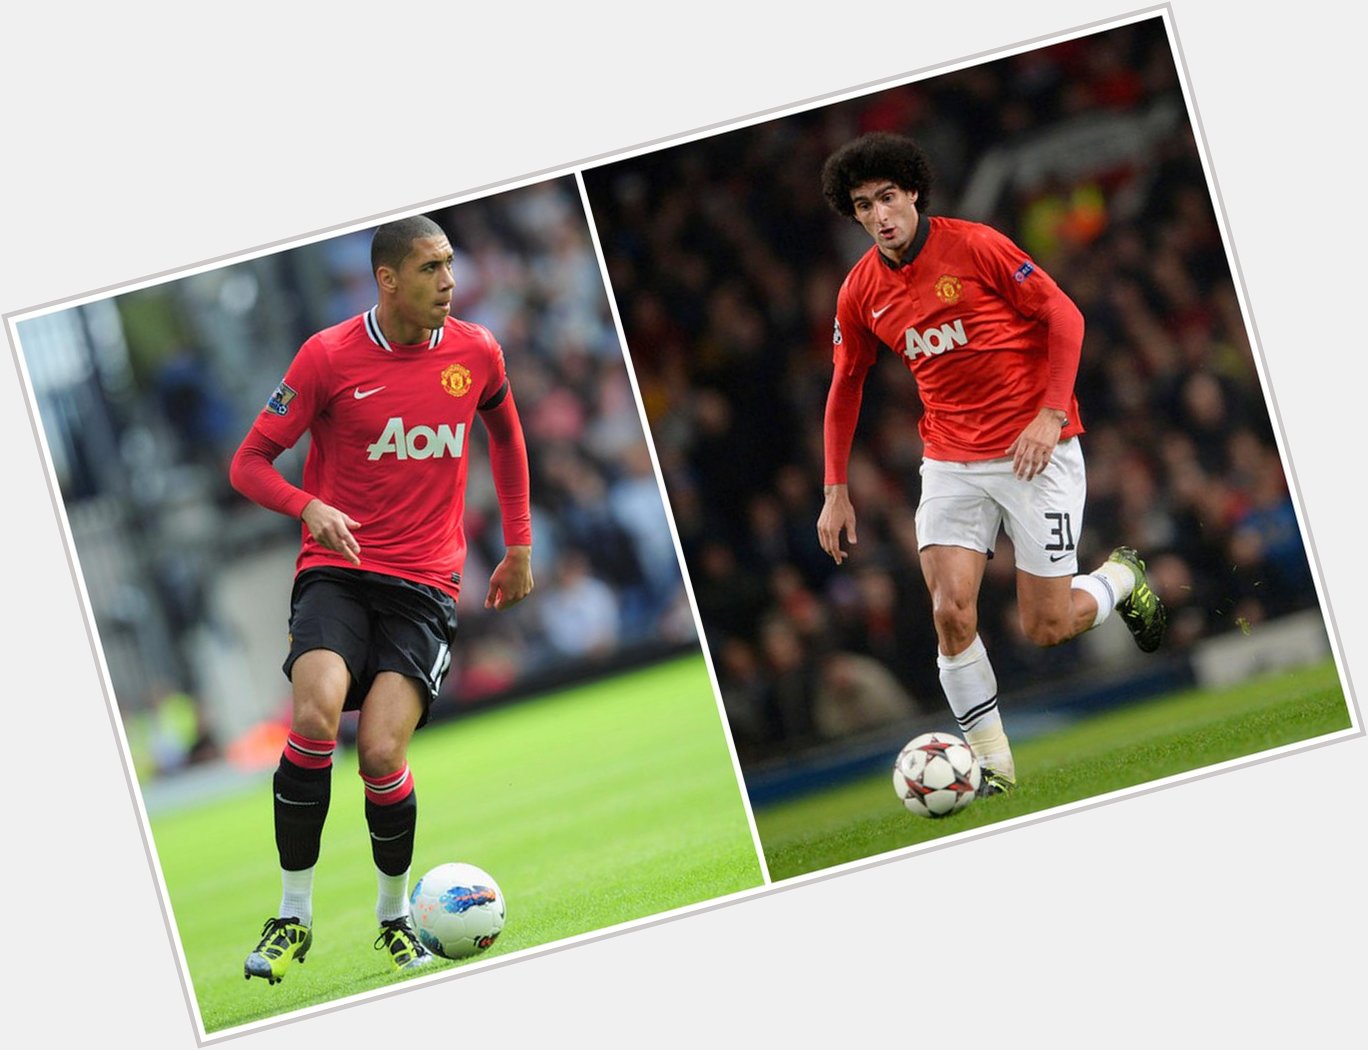 Wishing a Happy Birthday to duo Chris Smalling and Marouane Fellaini.
They turn 25 & 27 respectively today. 